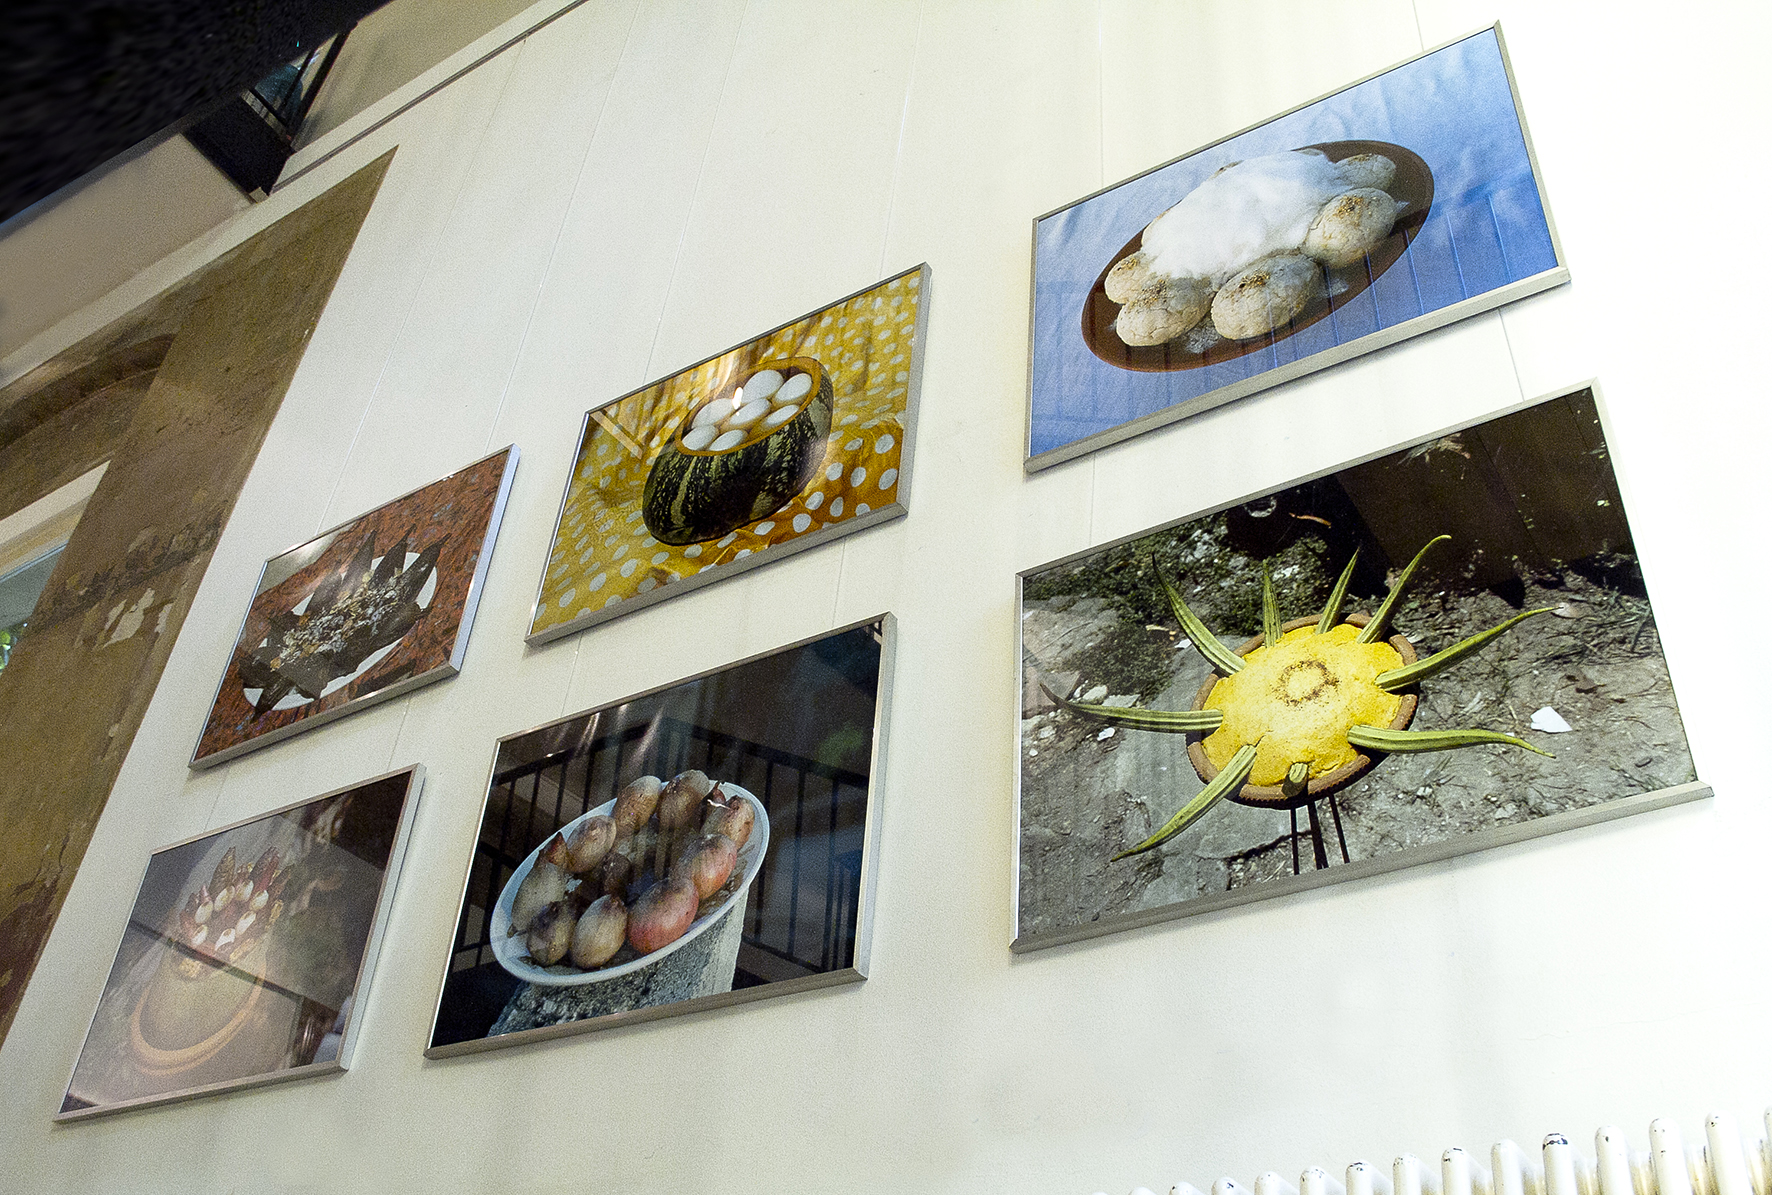 View of the photographic series Dishes for the Dead, as part of Spiritual Revolutions and The “Scramble for Africa”, in Ballhaus Naunynstrasse, Berlin, Germany, 2014